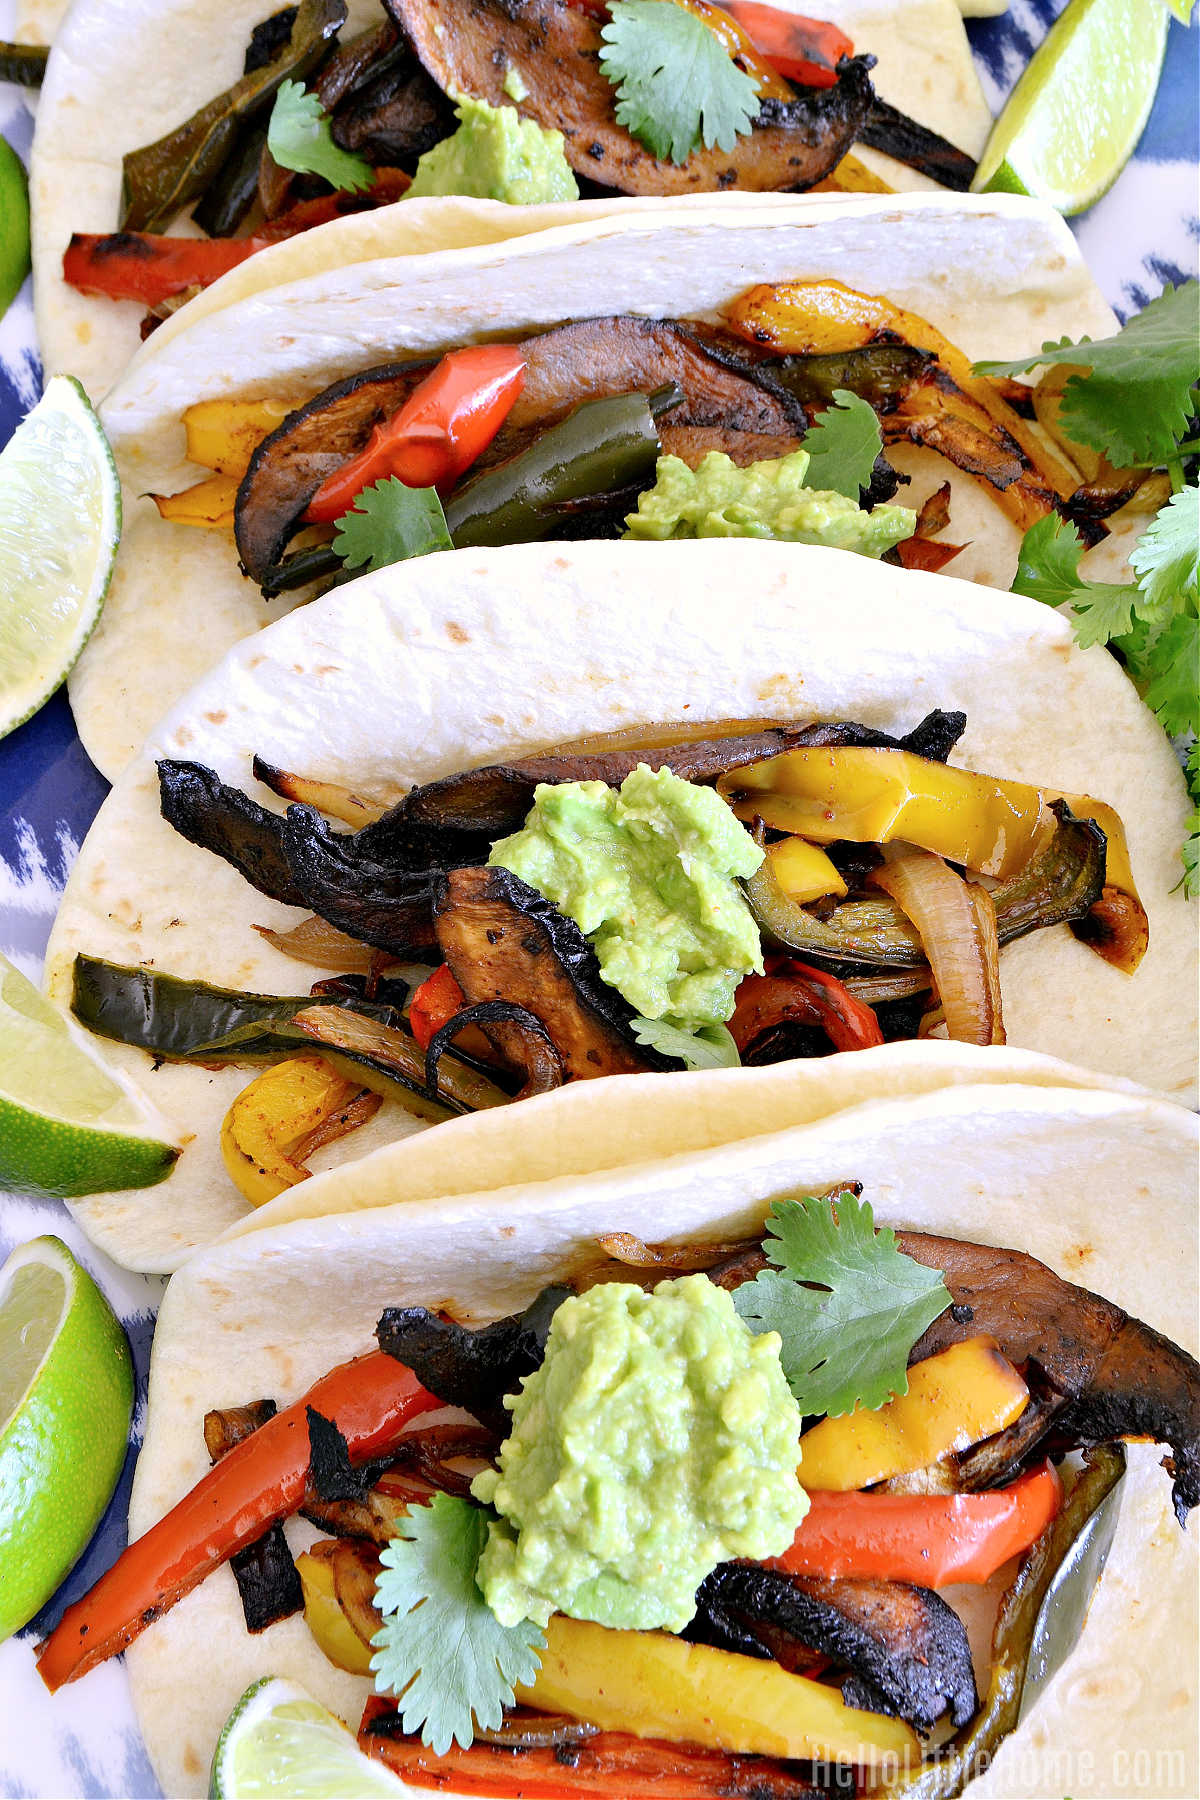 A row of tortillas filled with the cooked veggies and topped with guacamole.